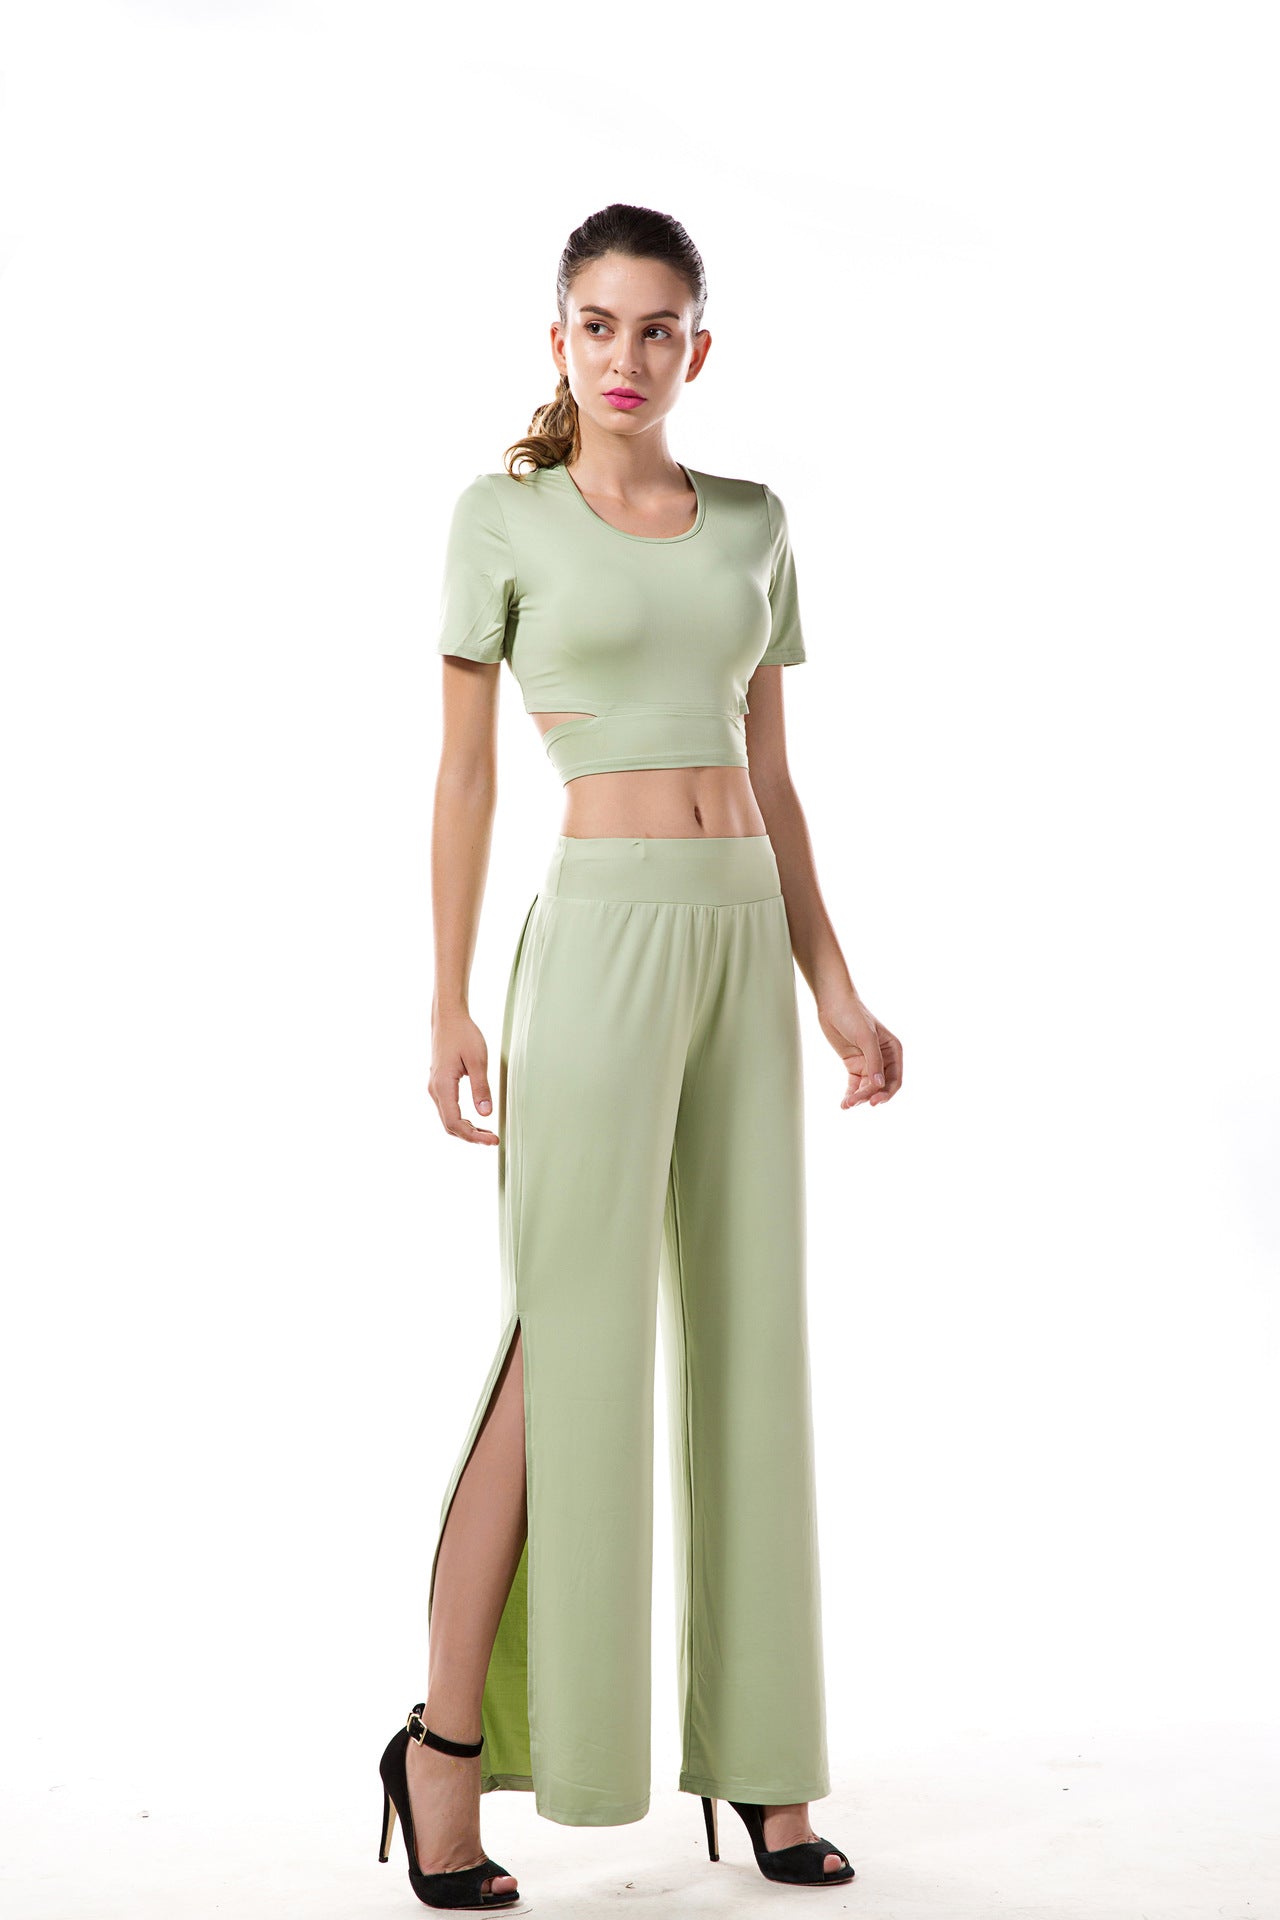 Green Top And Slit Trousers Two Pieces Set